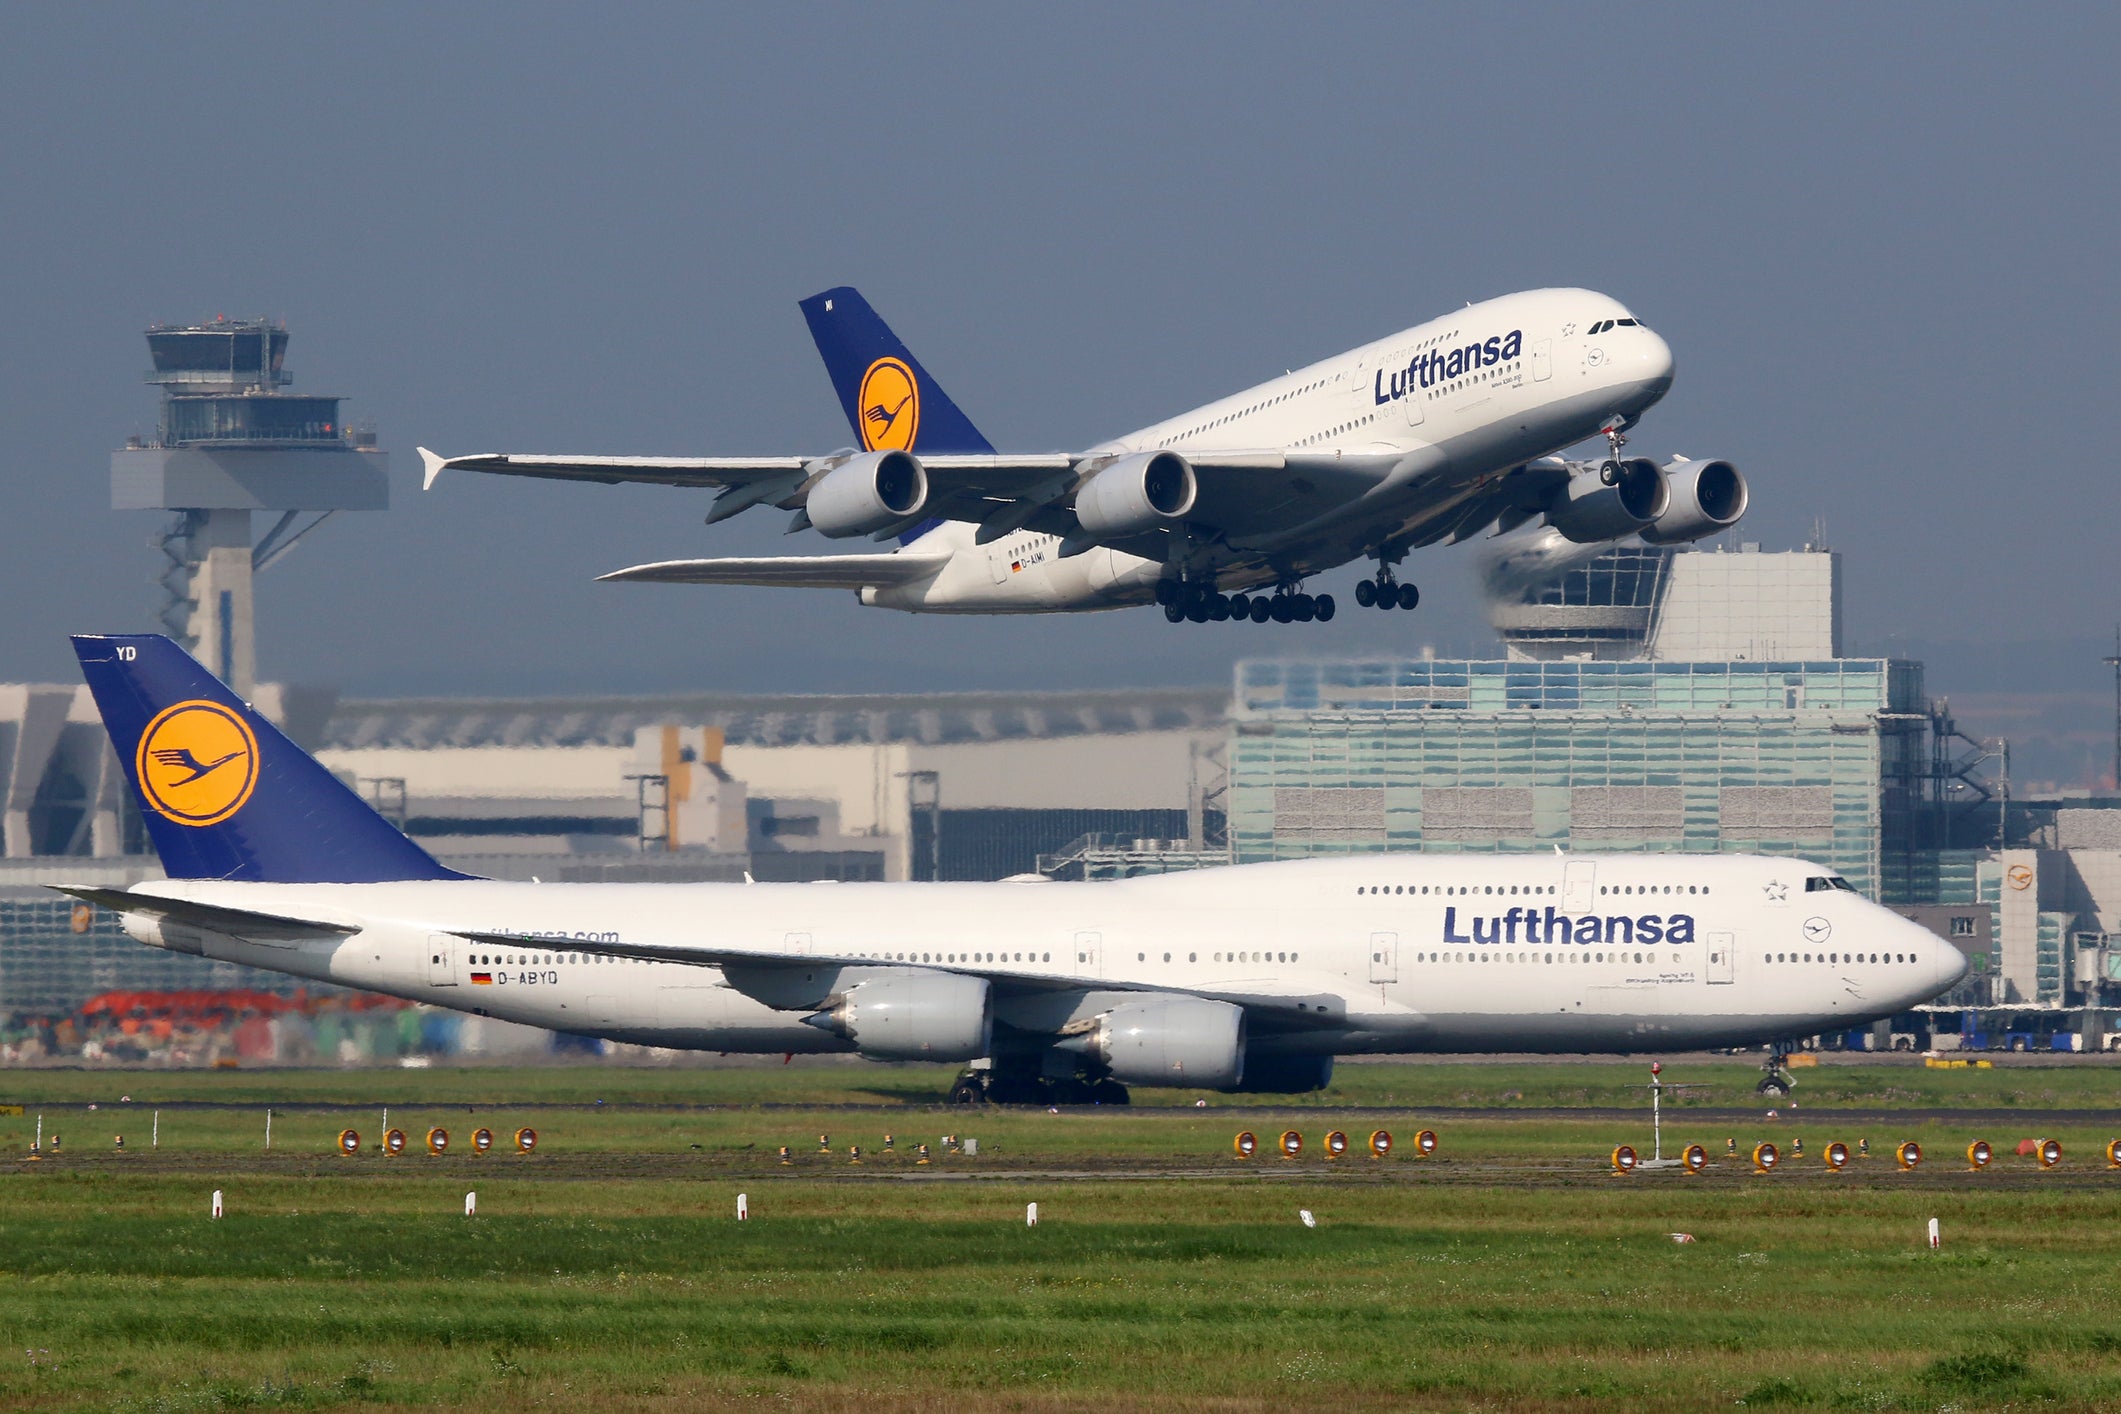 Lufthansa offer decent deals for the route despite passengers having to pay airport charges